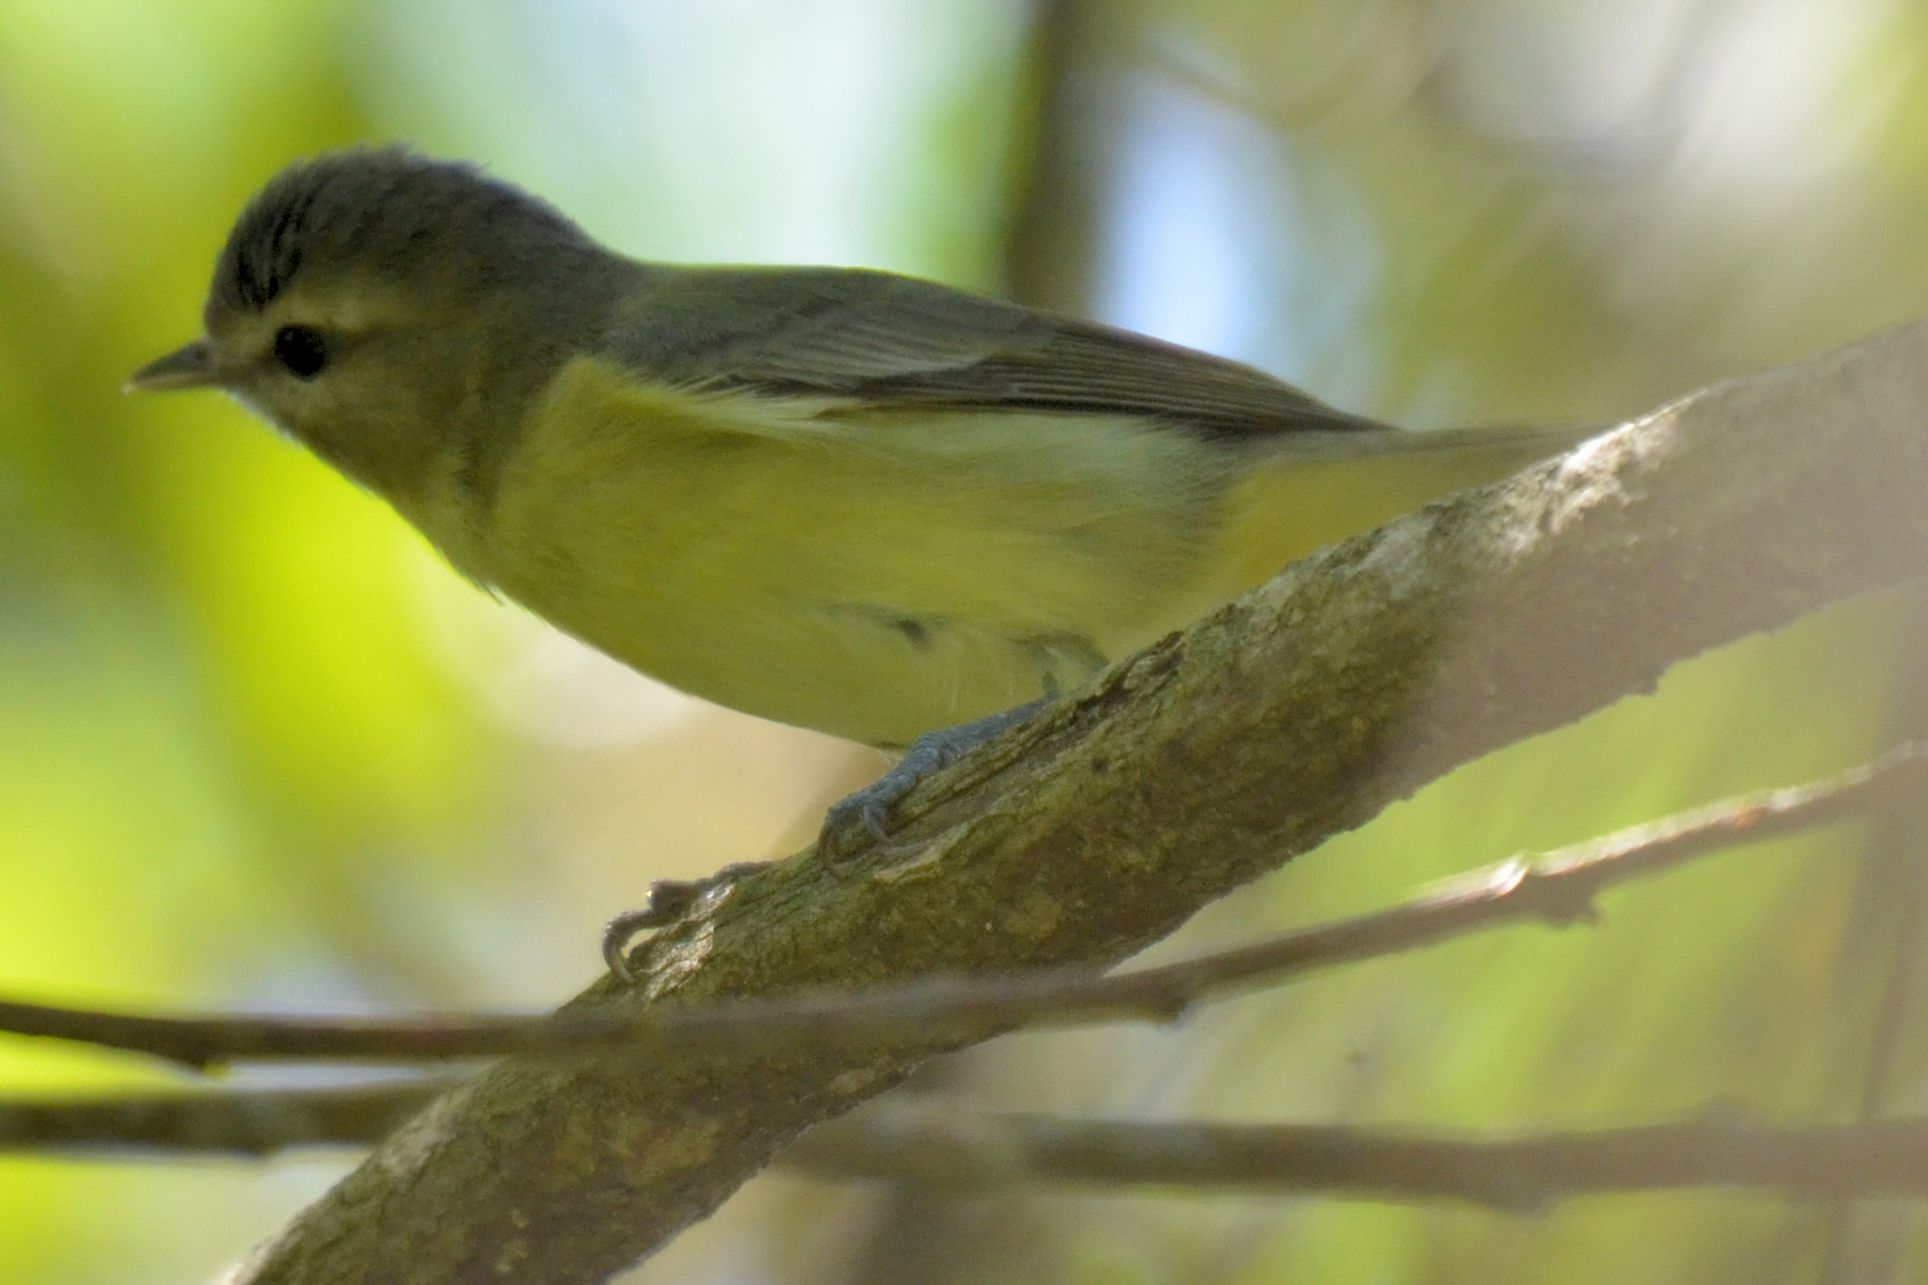 Click picture to see more Philadelphia Vireos.